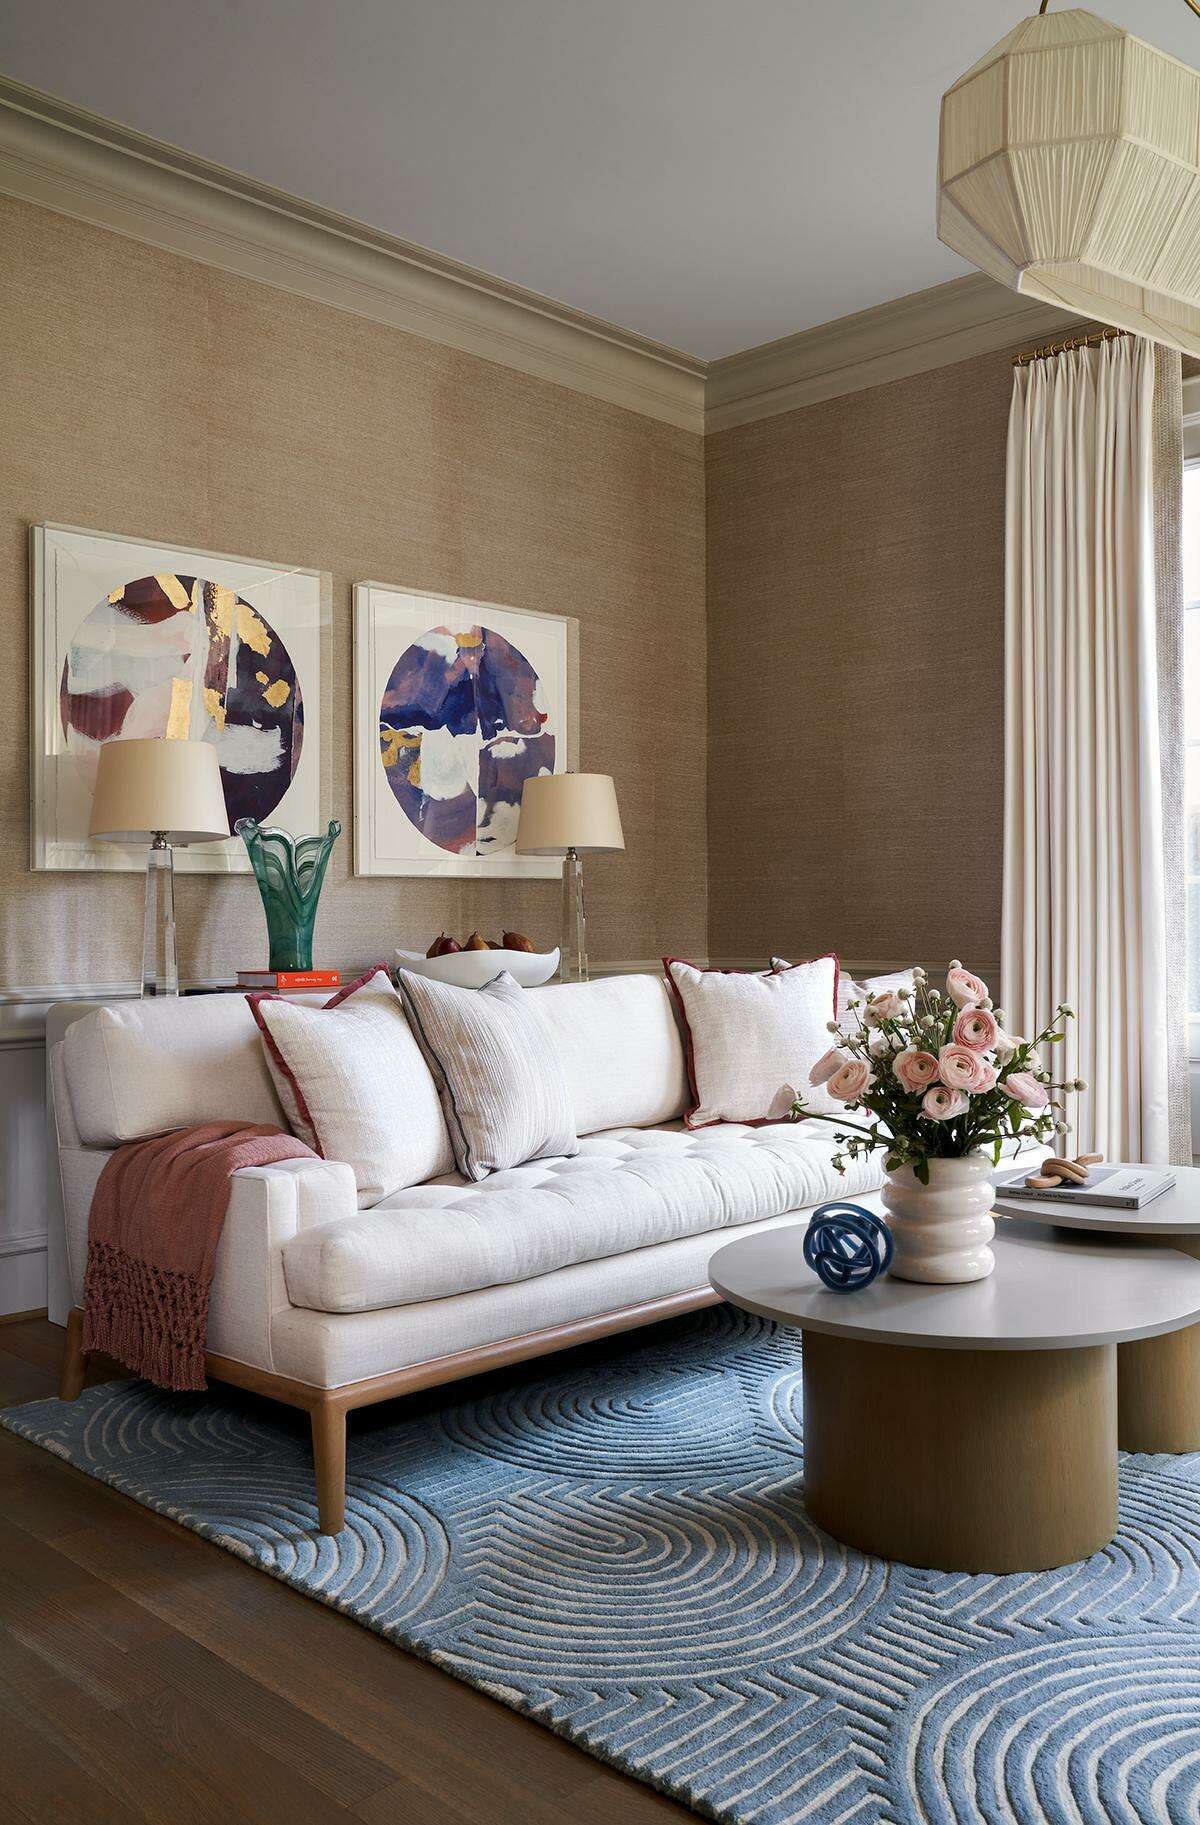 Tiffany Nguyen loves the style of Palecek furniture, and added a pair of the brand’s chairs to the formal living room.